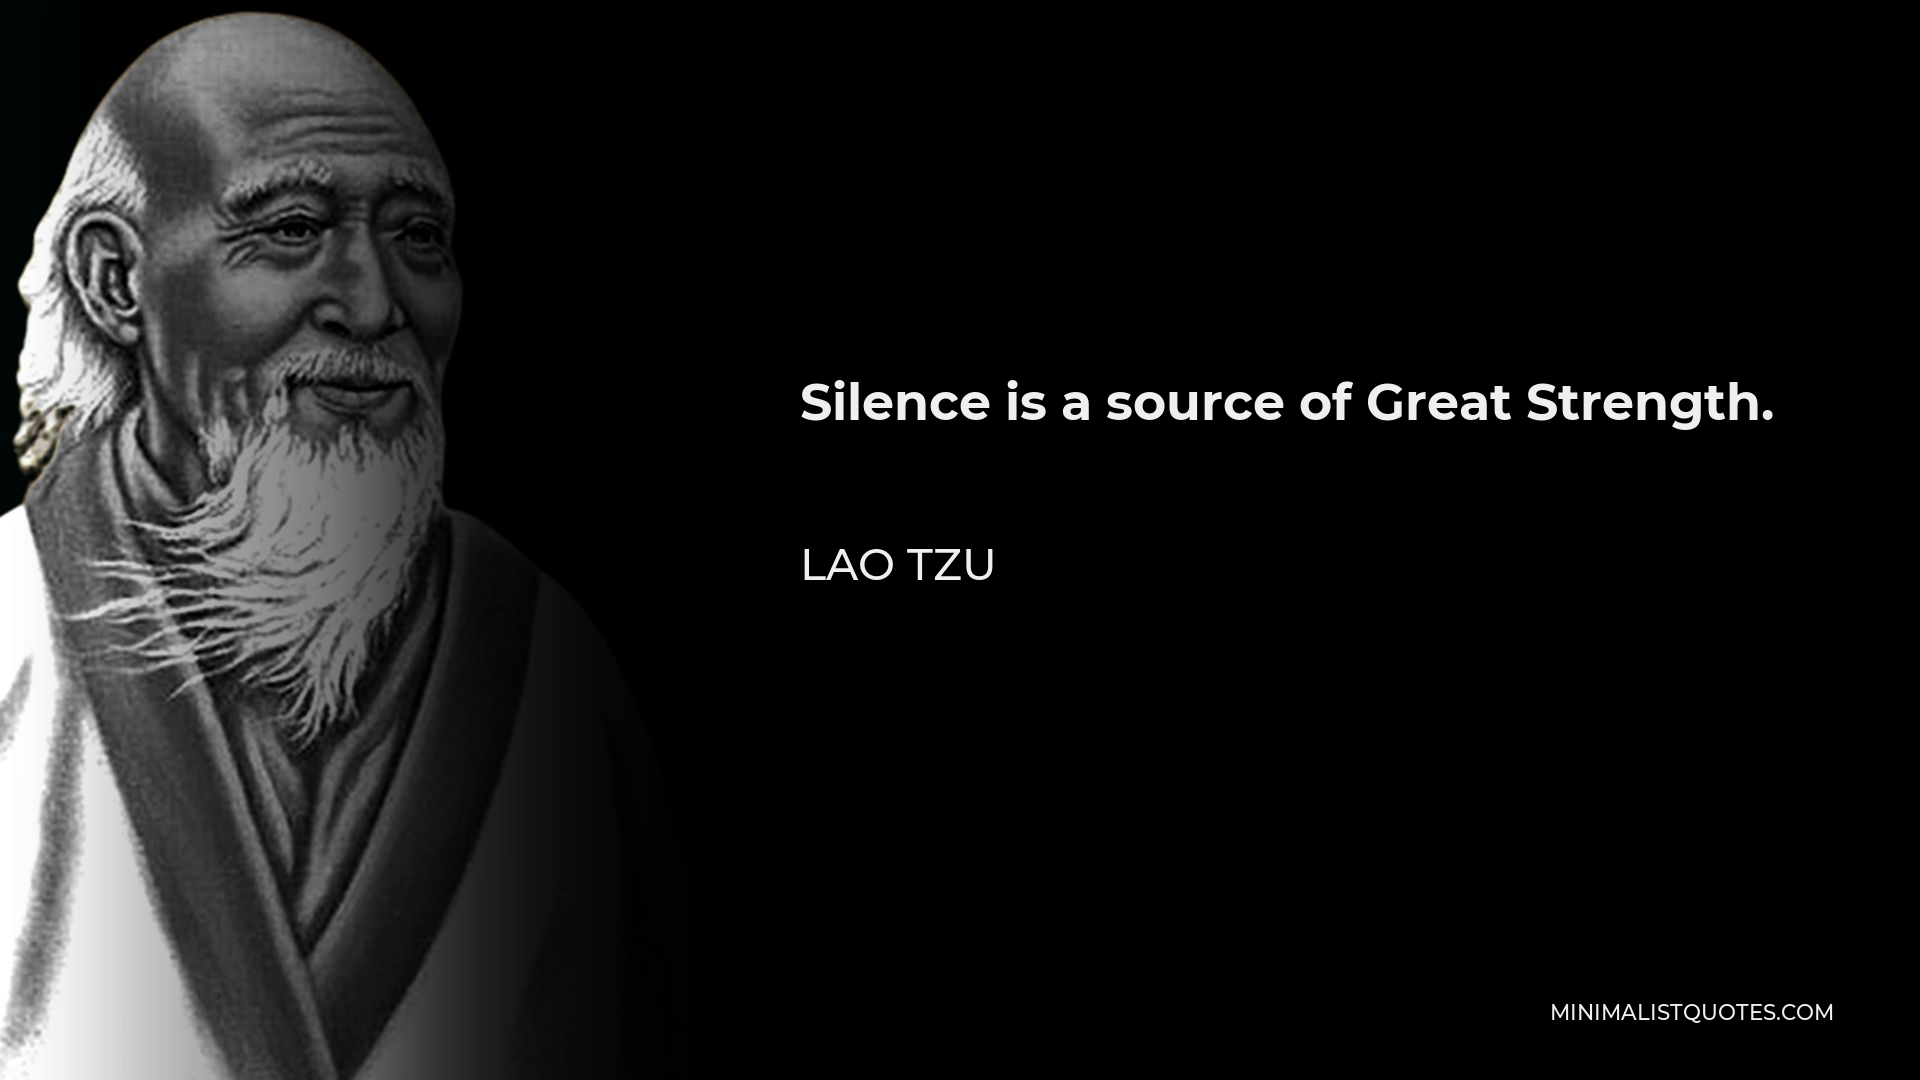 Lao Tzu Quote Silence is a source of Great Strength  Lao tzu quotes Lao  tzu Inspirational quotes wallpapers